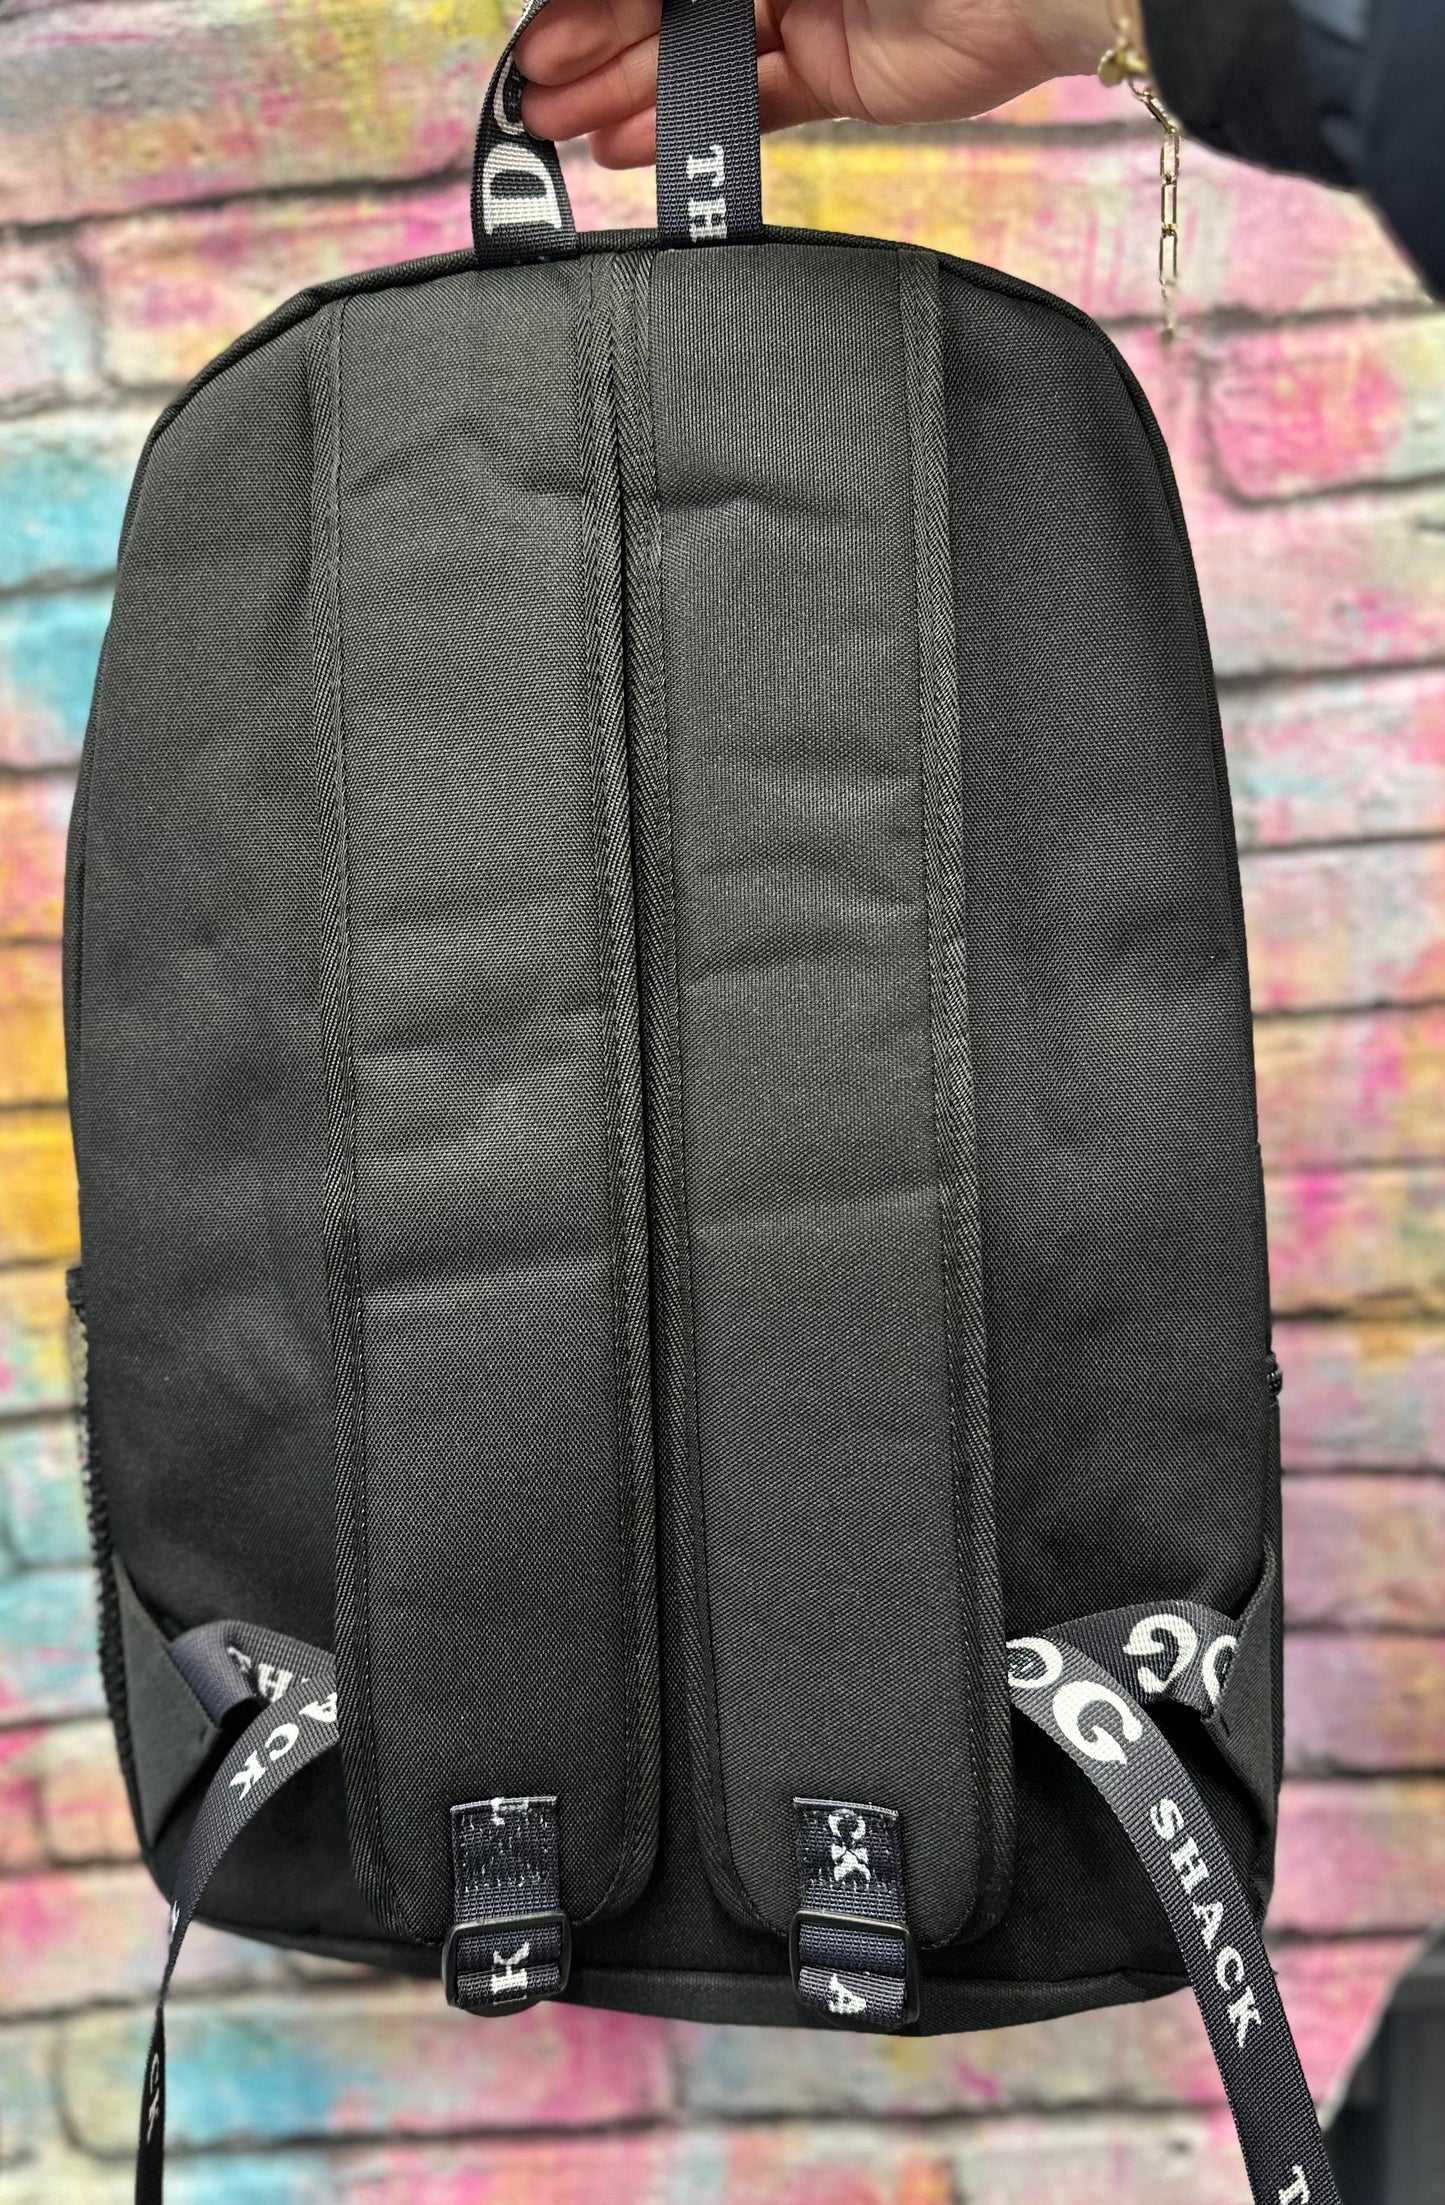 The Active Backpack Wholesale